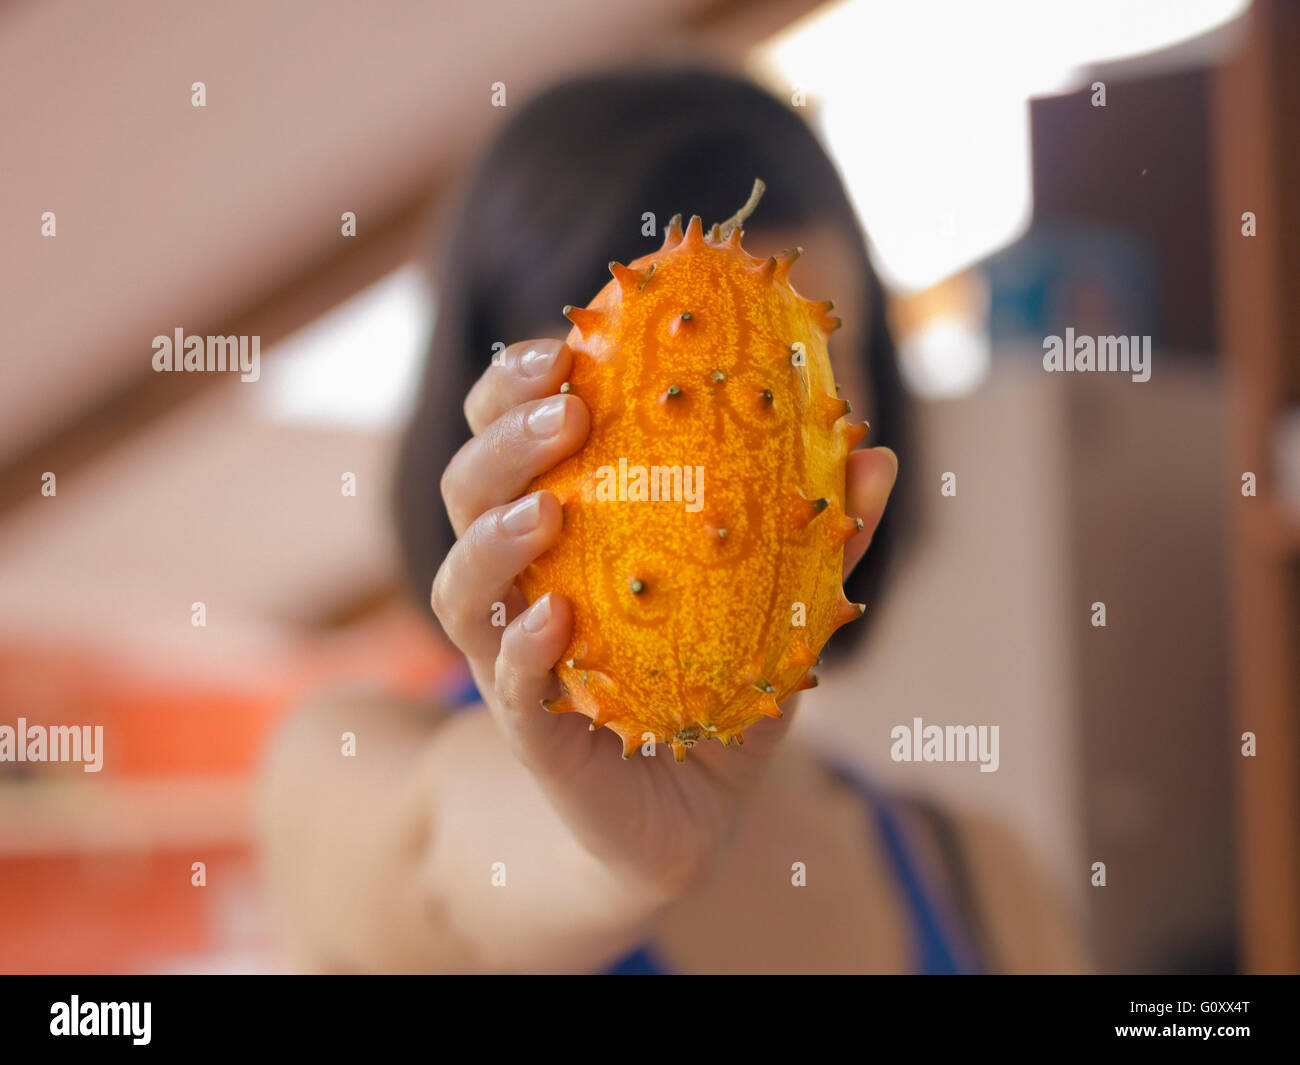 Woman holding an African Horned Melon Stock Photo